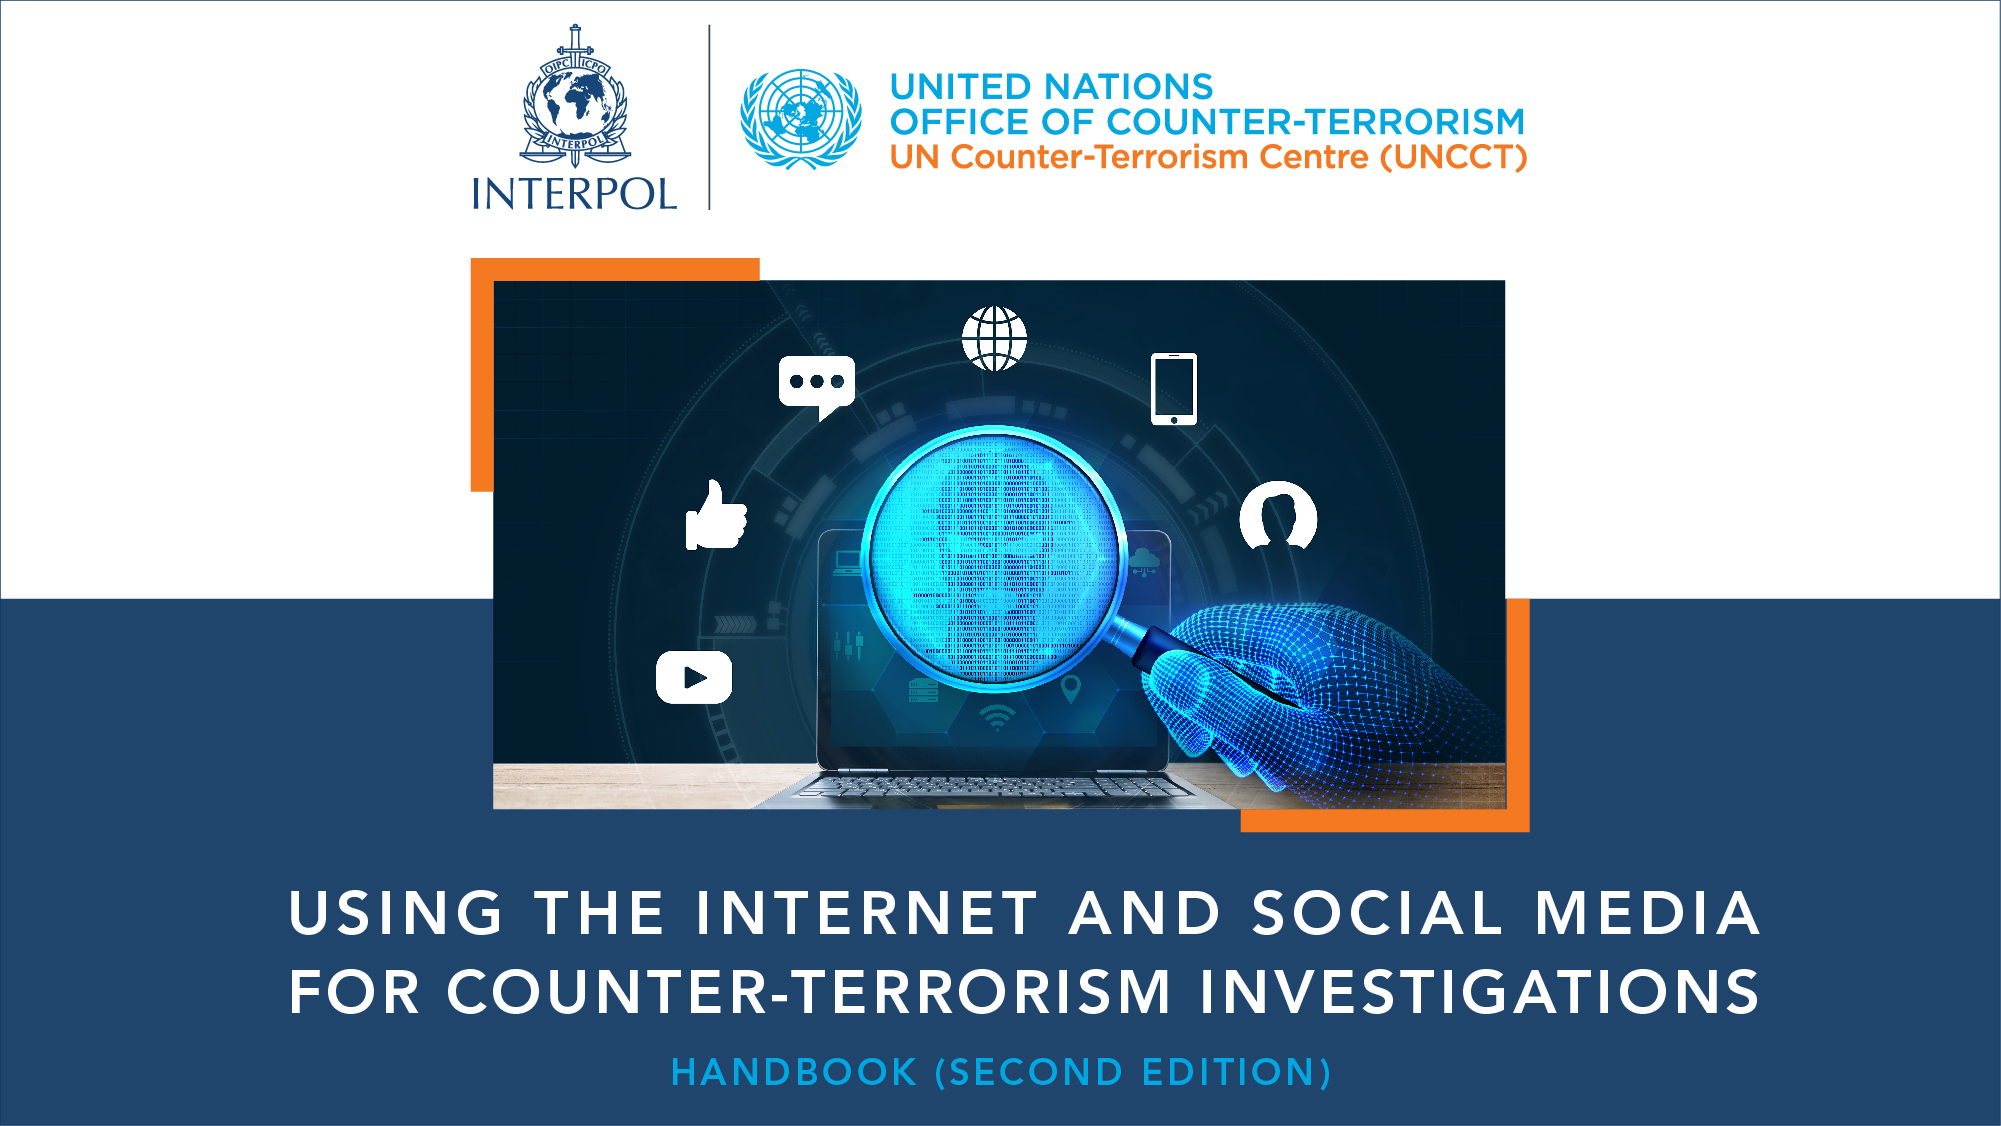 UNCCT and INTERPOL jointly launched a new edition of a handbook for law enforcement on counter-terrorism investigations online